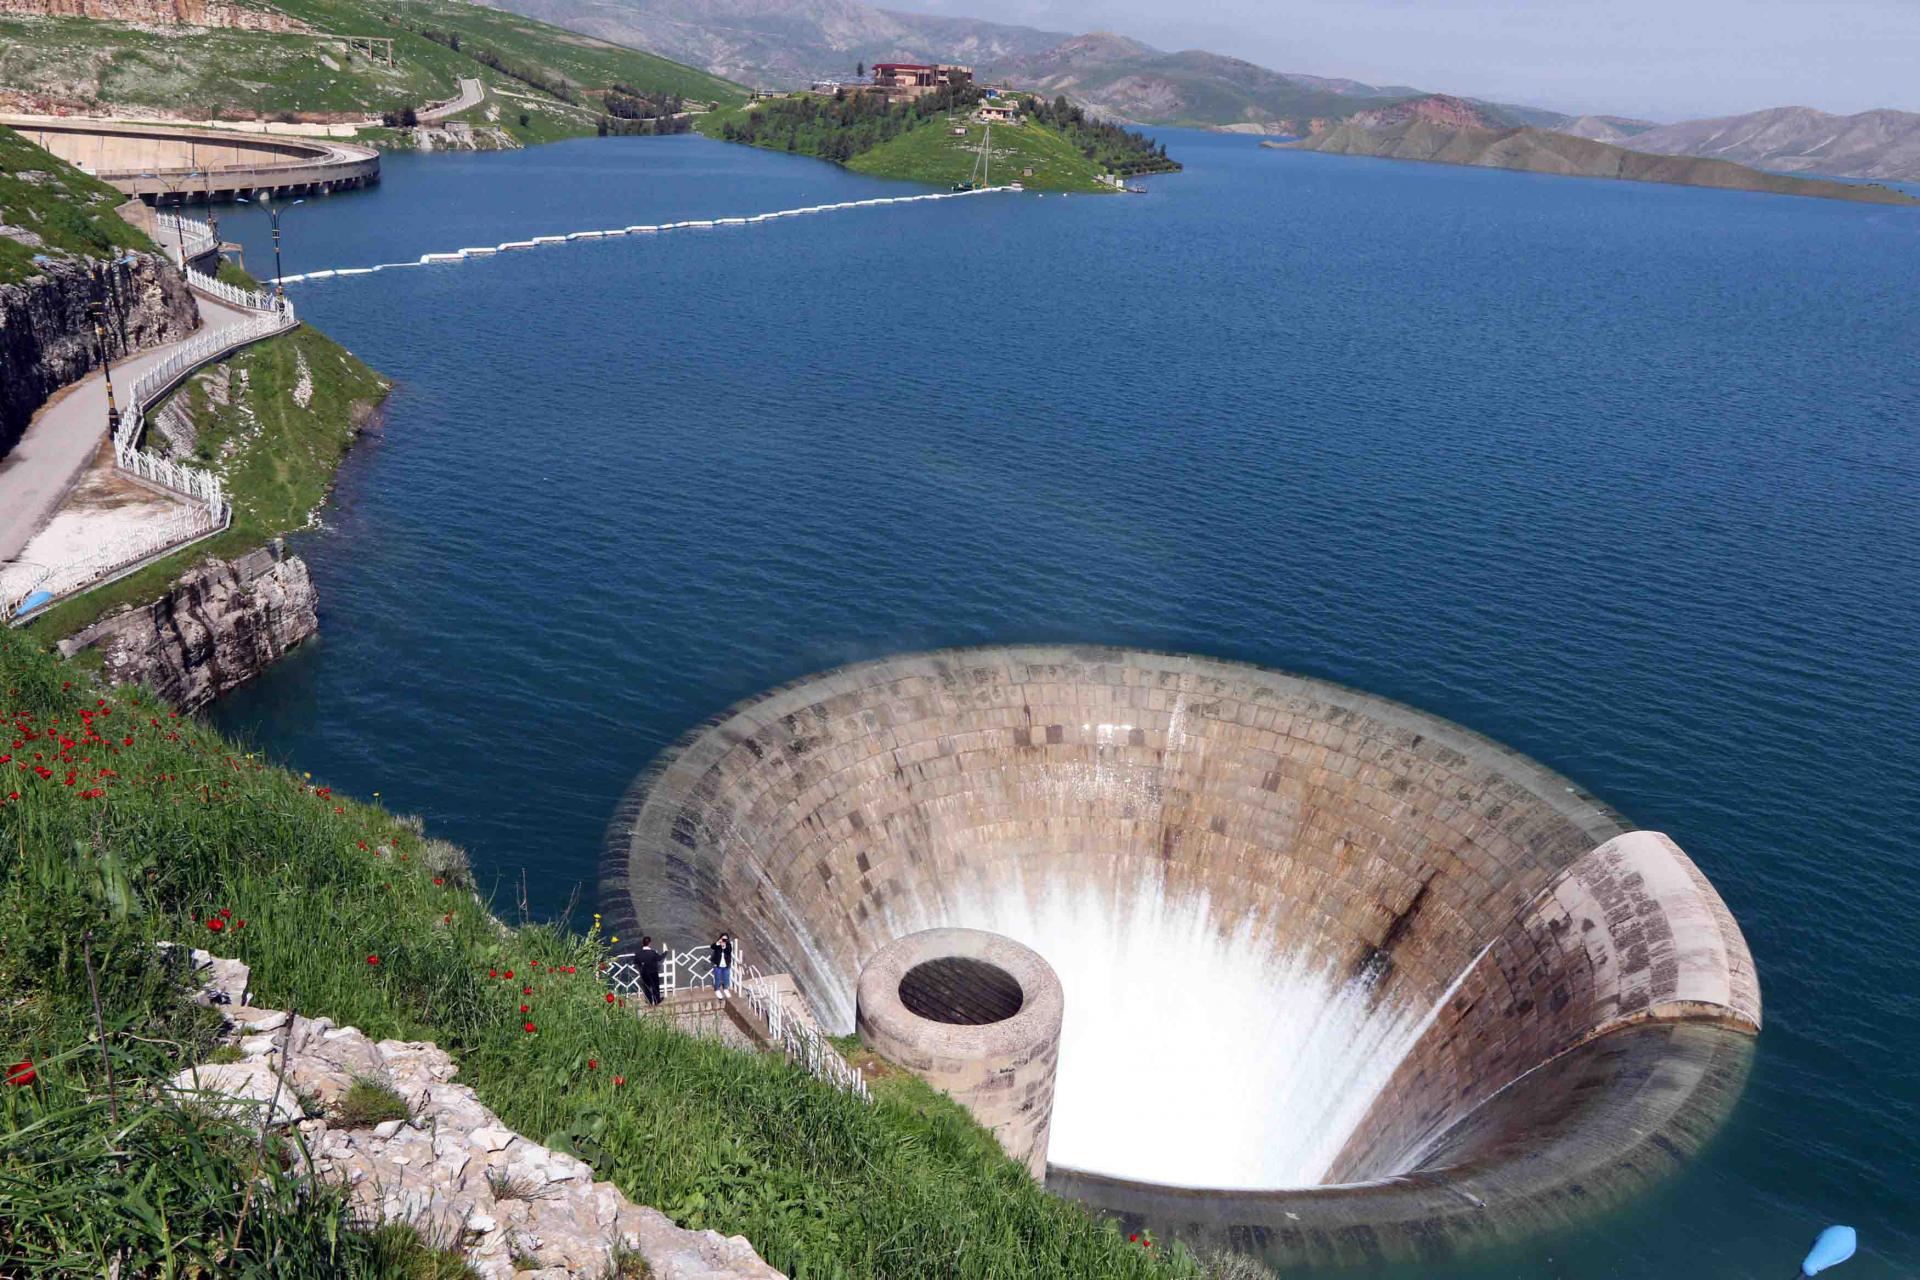 The Dukan dam in the northeast also "had not witnessed water levels this high since 1988," said manager Hama Taher